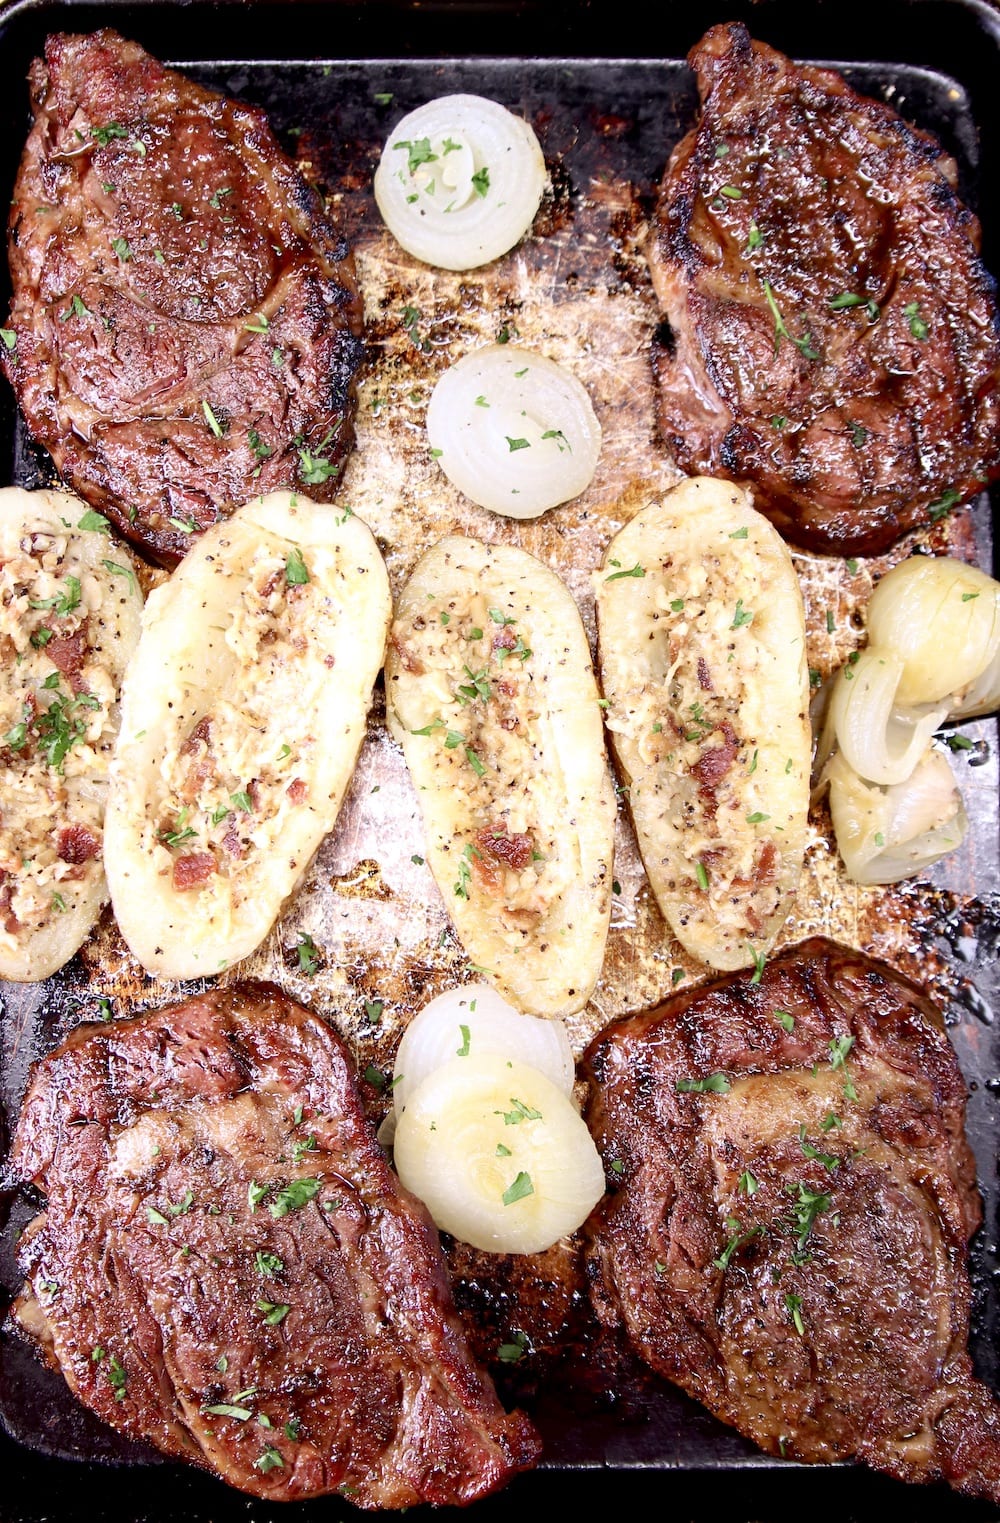 sheet pan with grilled steaks, baked potatoes